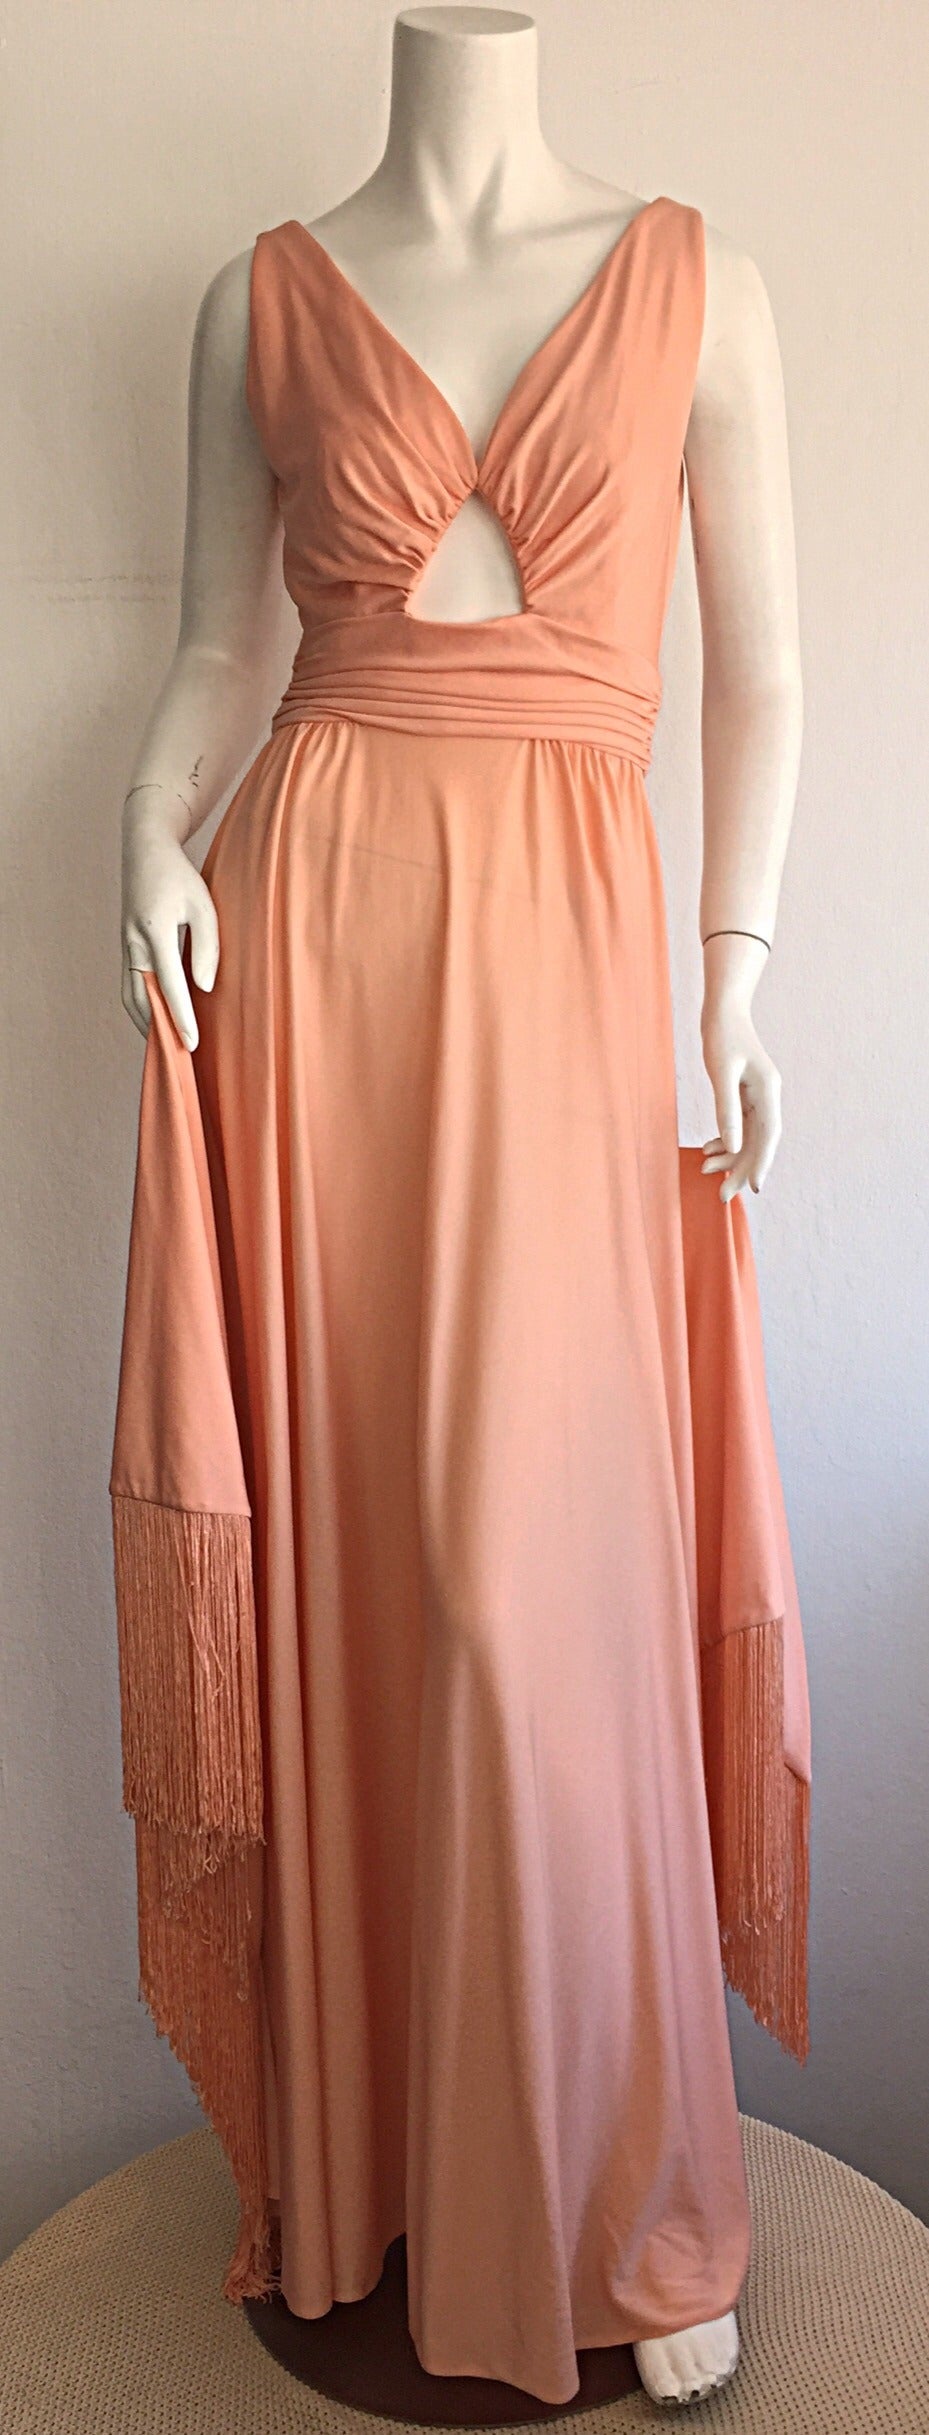 Wonderful 1970s Perullo for Fred Perlberg coral maxi dress AND fringed shawl! Dress features keyhole at bust, with a striking full skirt. Shawl has to slots for fingers. Looks great on the dance floor! Can easily transition from day to night.